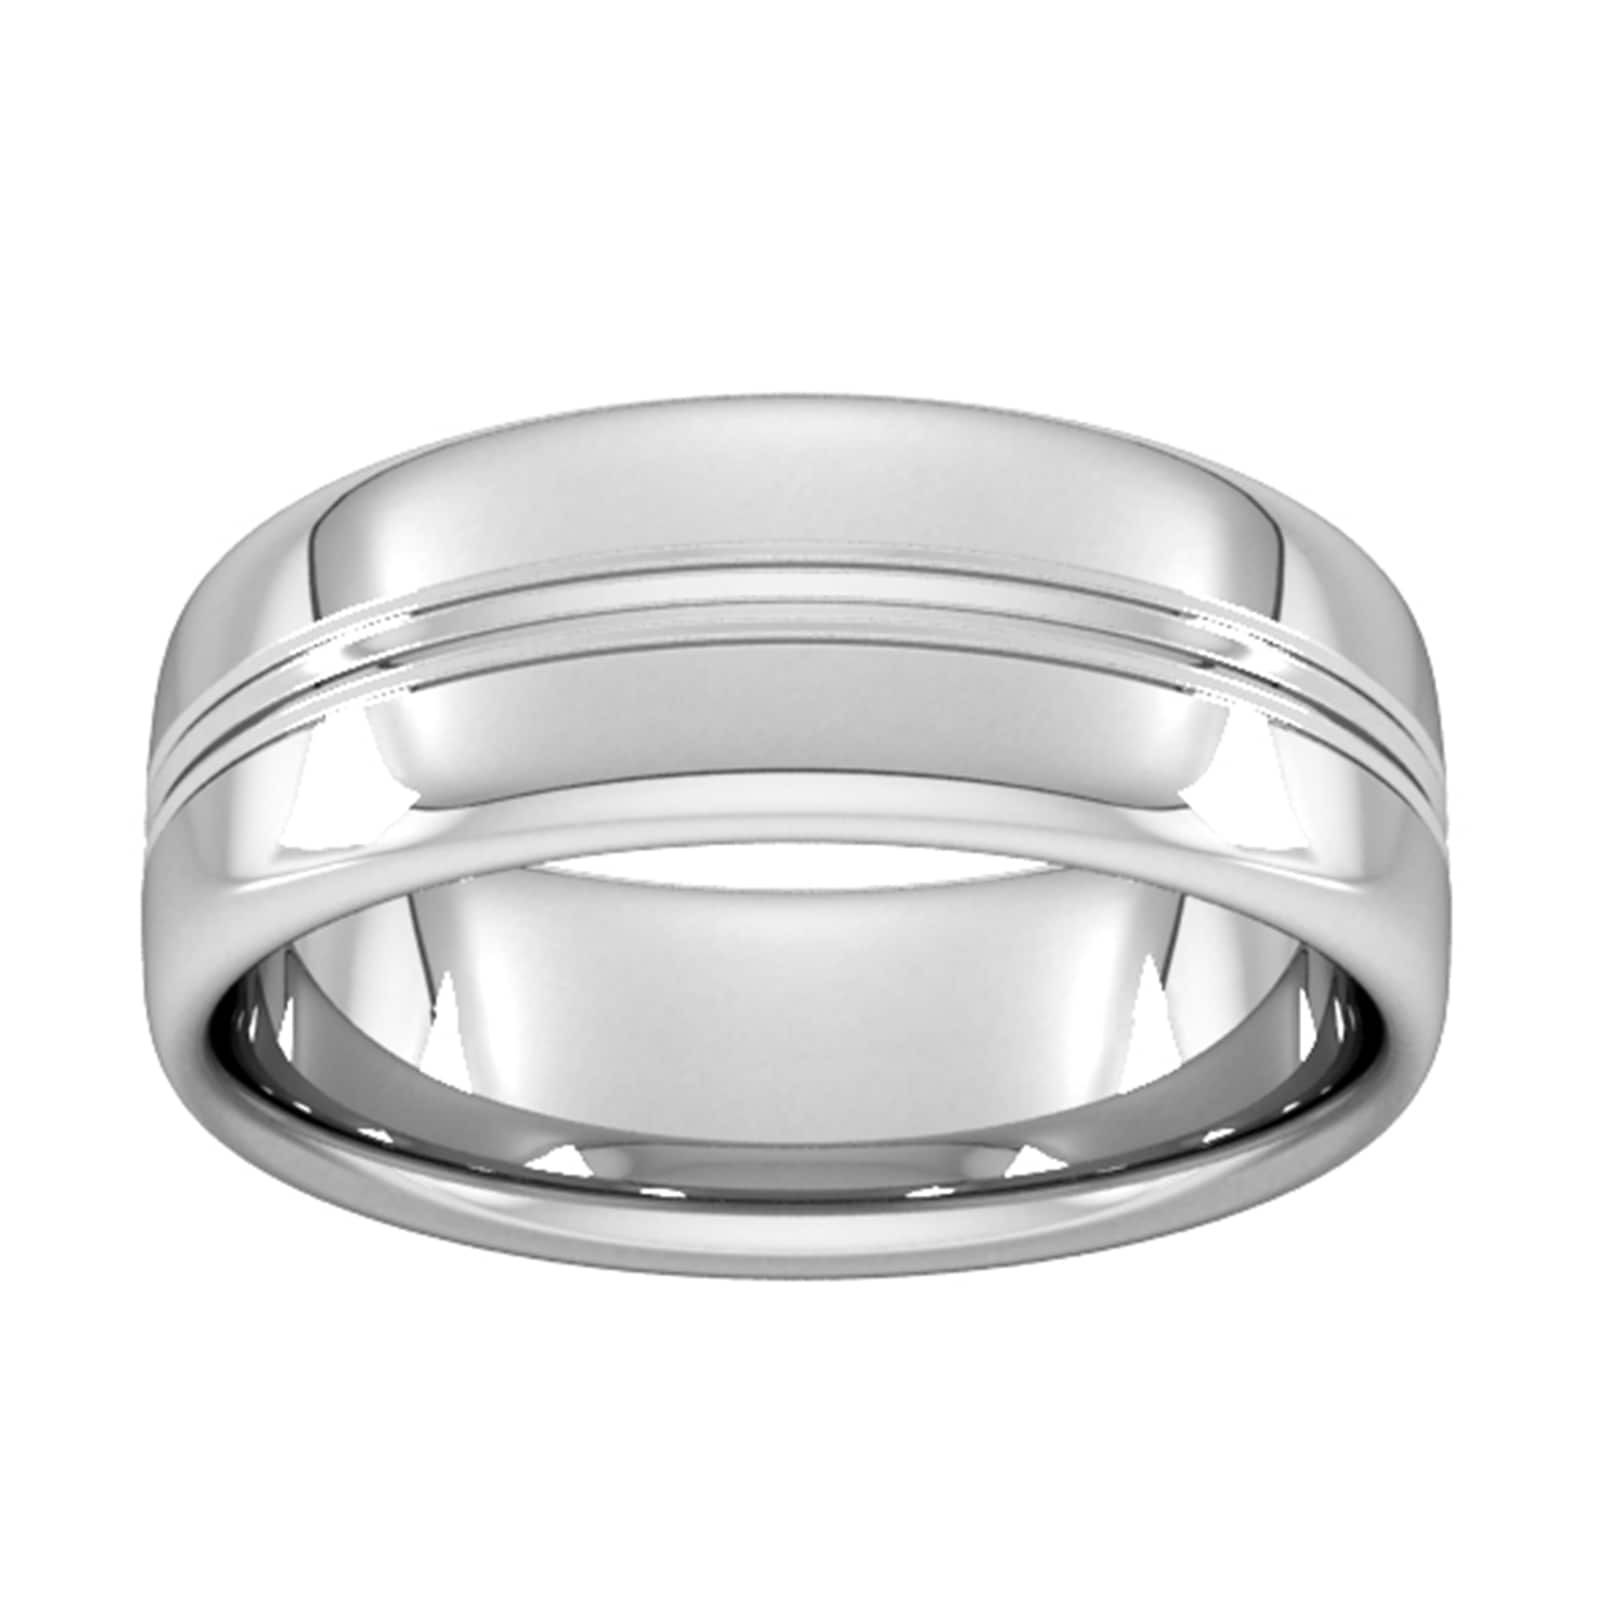 8mm Slight Court Extra Heavy Grooved Polished Finish Wedding Ring In 9 Carat White Gold - Ring Size G